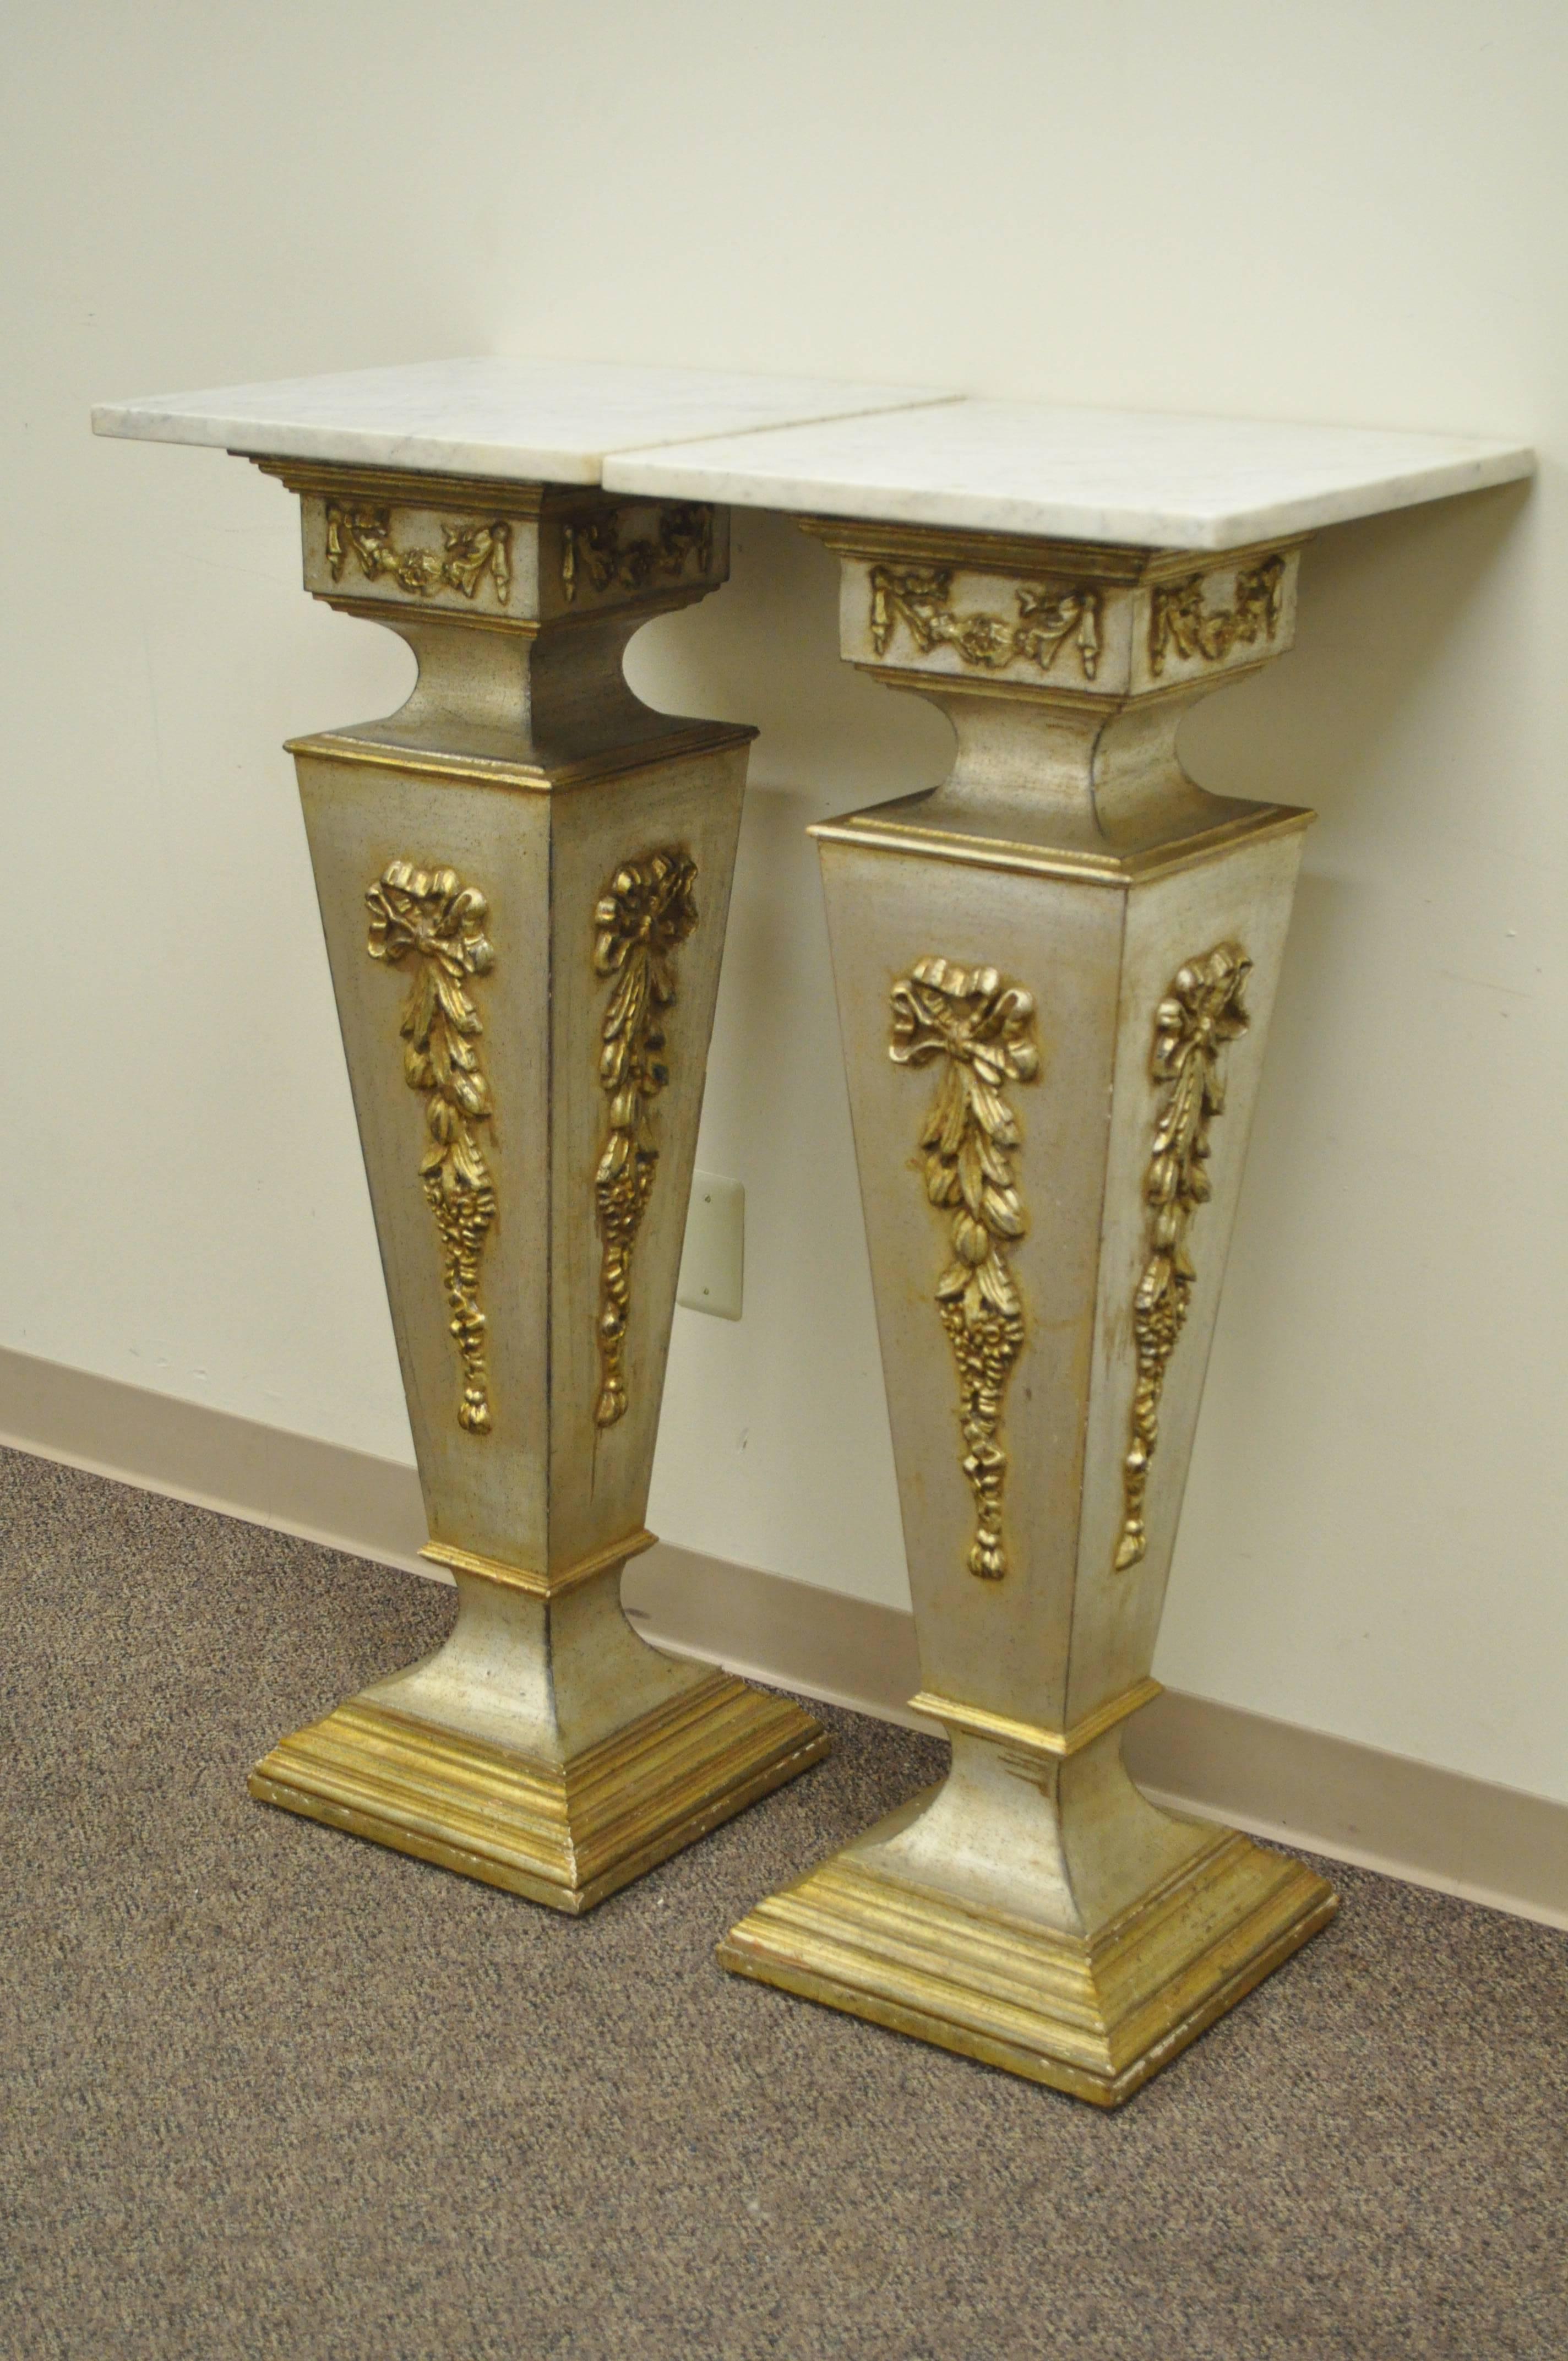 Pair of 20th Century Italian Florentine Marble Top Pedestals, Bust Tables. The pair features rounded edge square white marble tops, beautiful floral drape detailing on all sides, and an attractive gold, silver gilt leaf finish.